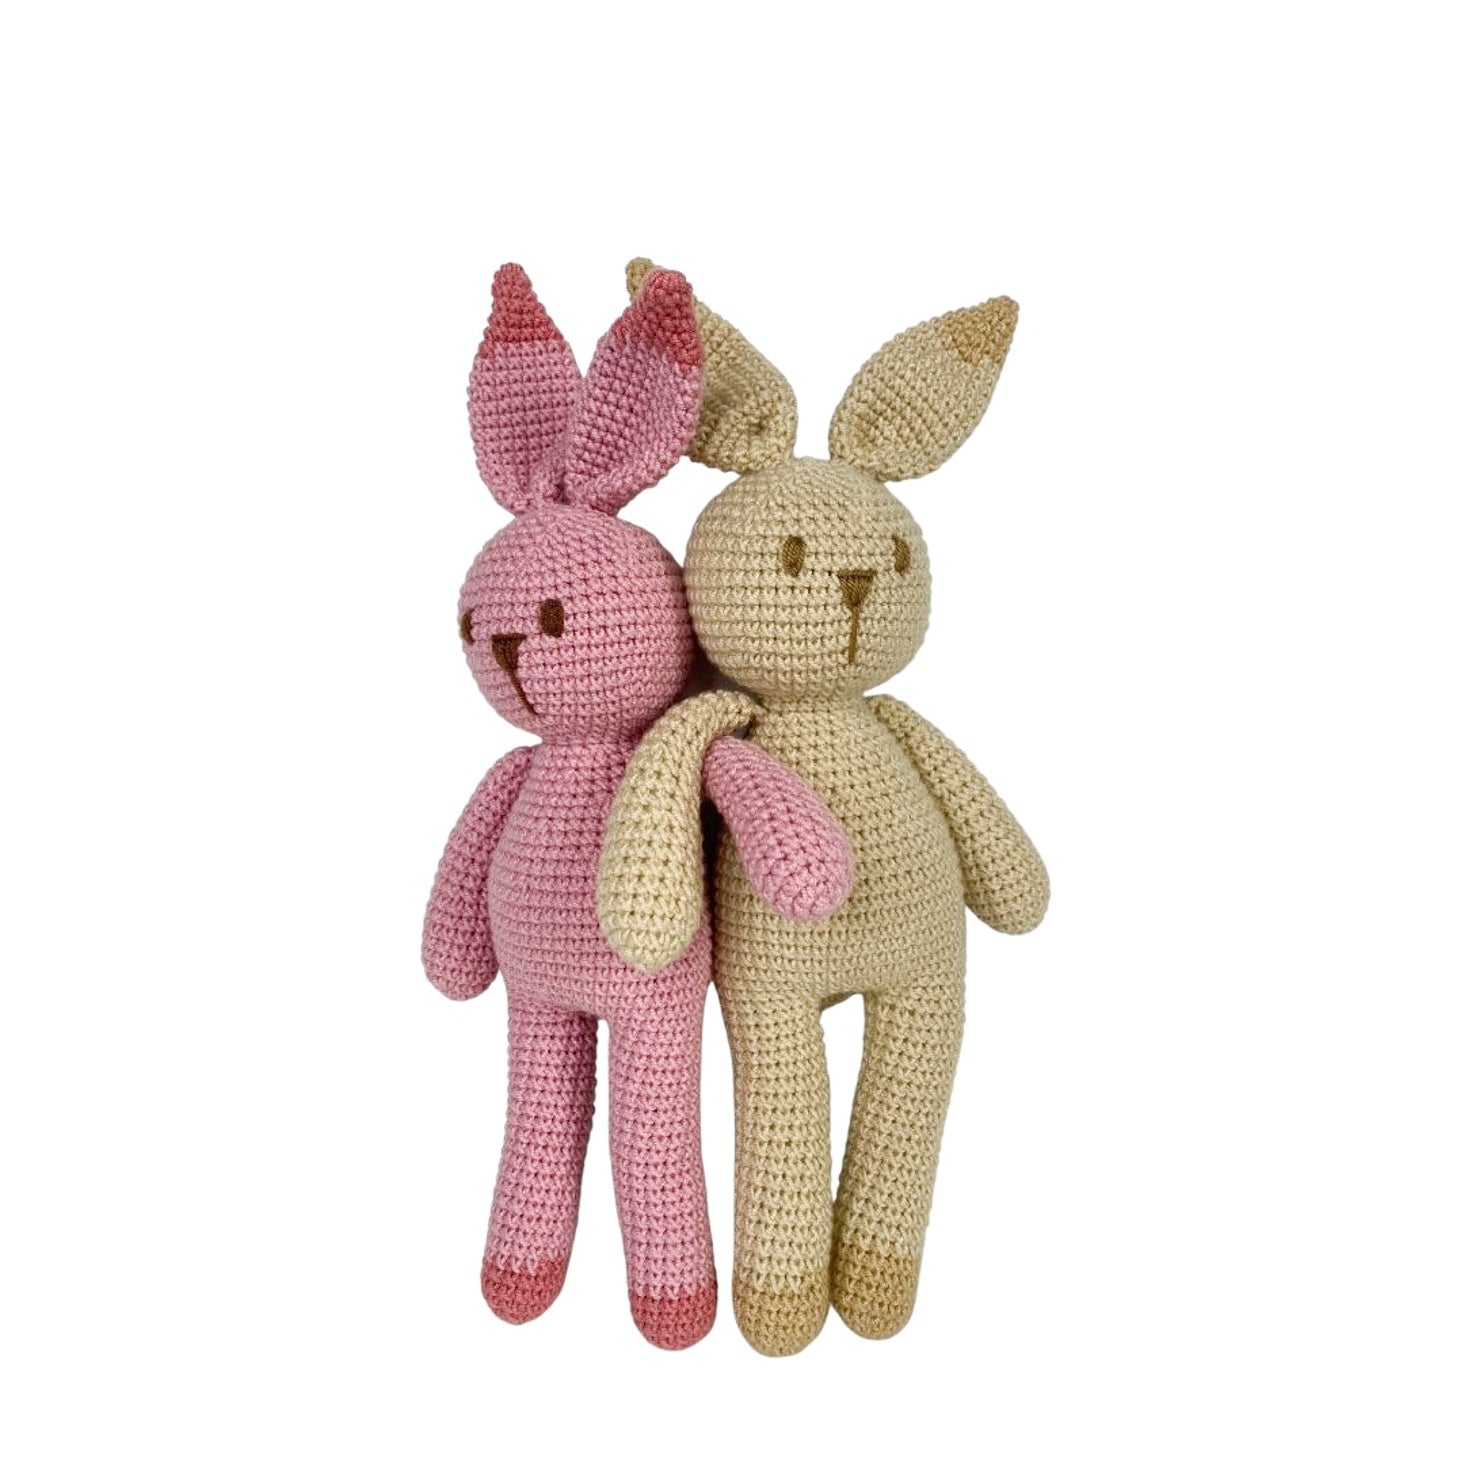 KawaiOnO Crochet Stuffed Animal - Adorable Handmade Bunny Daughter Plushie  Doll with Pink Dress, Ideal for Infants - Knitted Stuffed Animal Crocheted